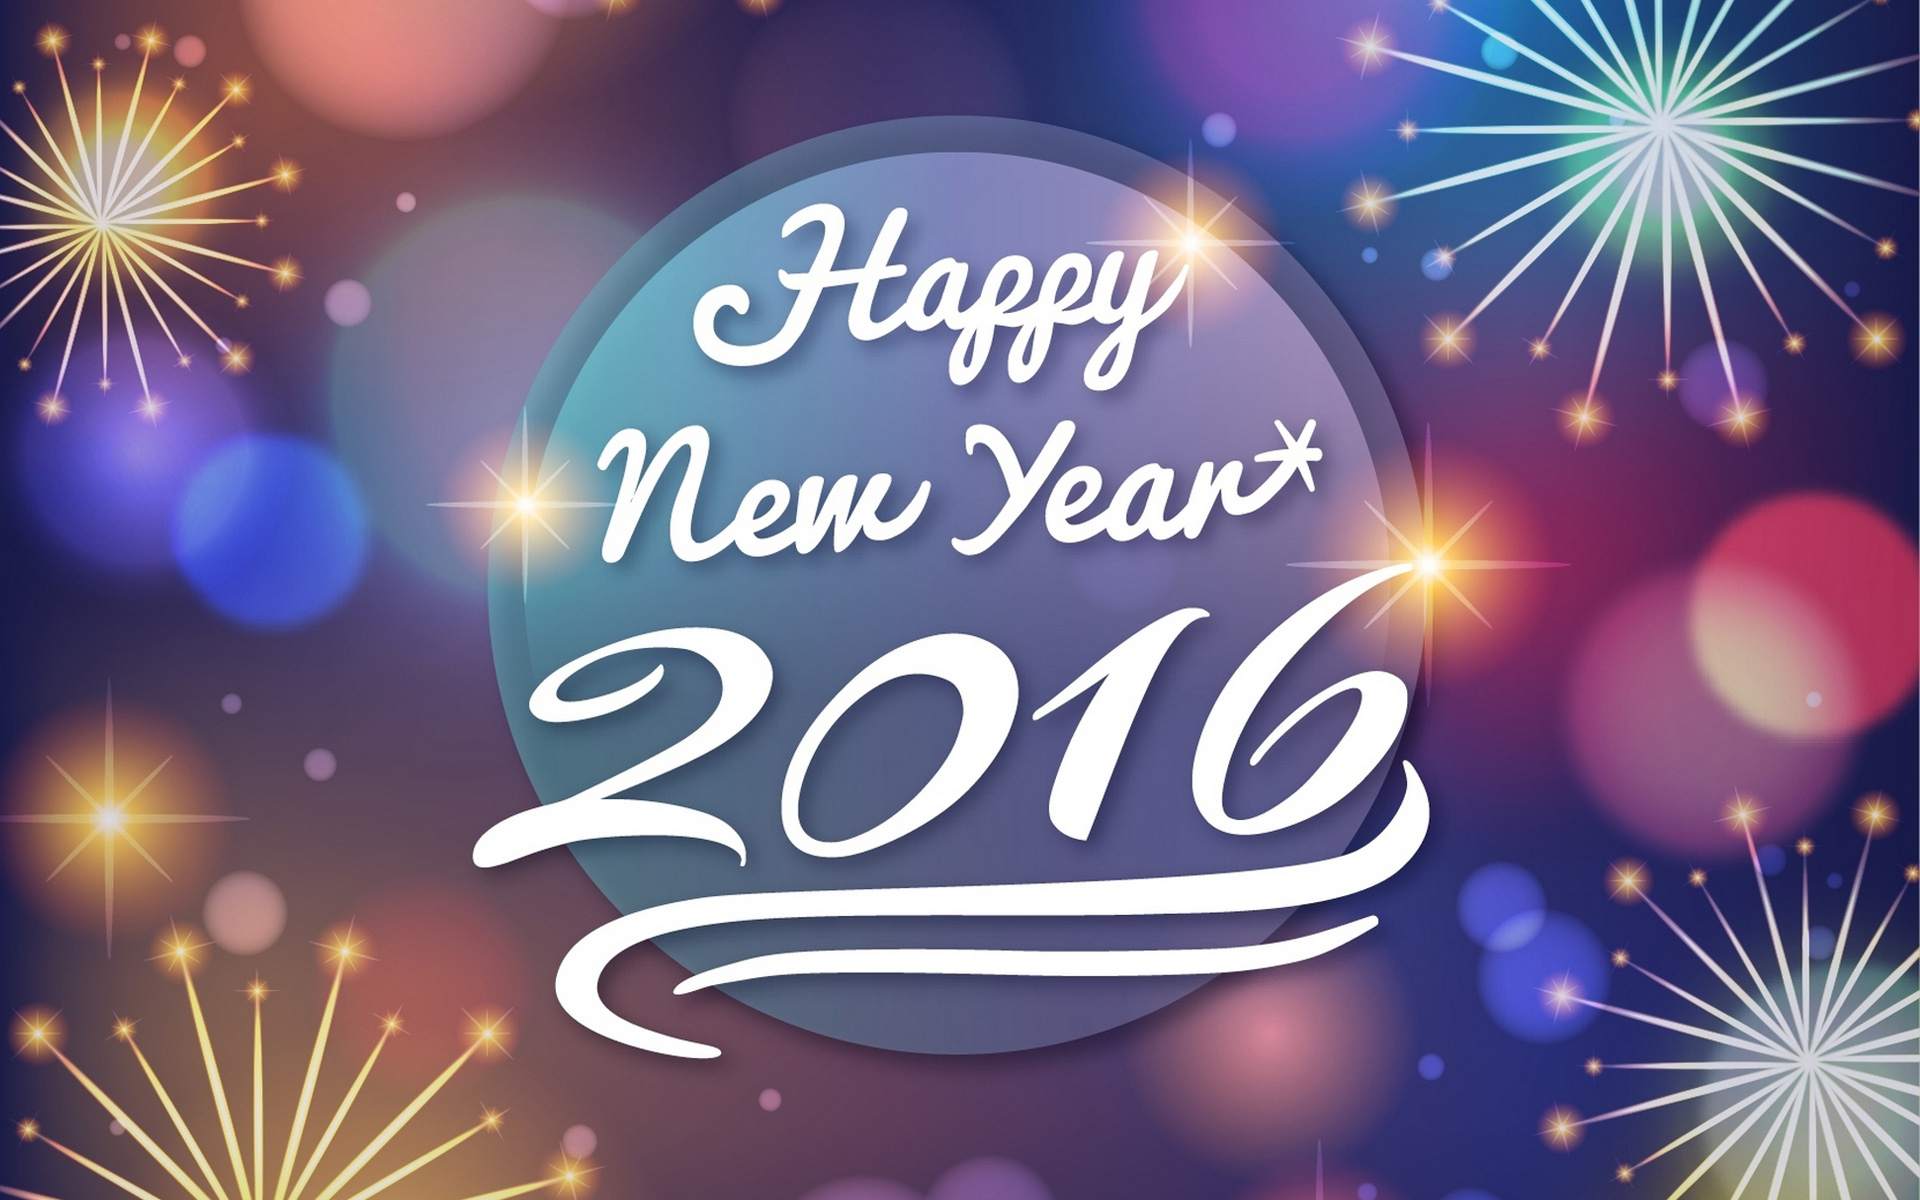 New Year Wallpapers 2016 on